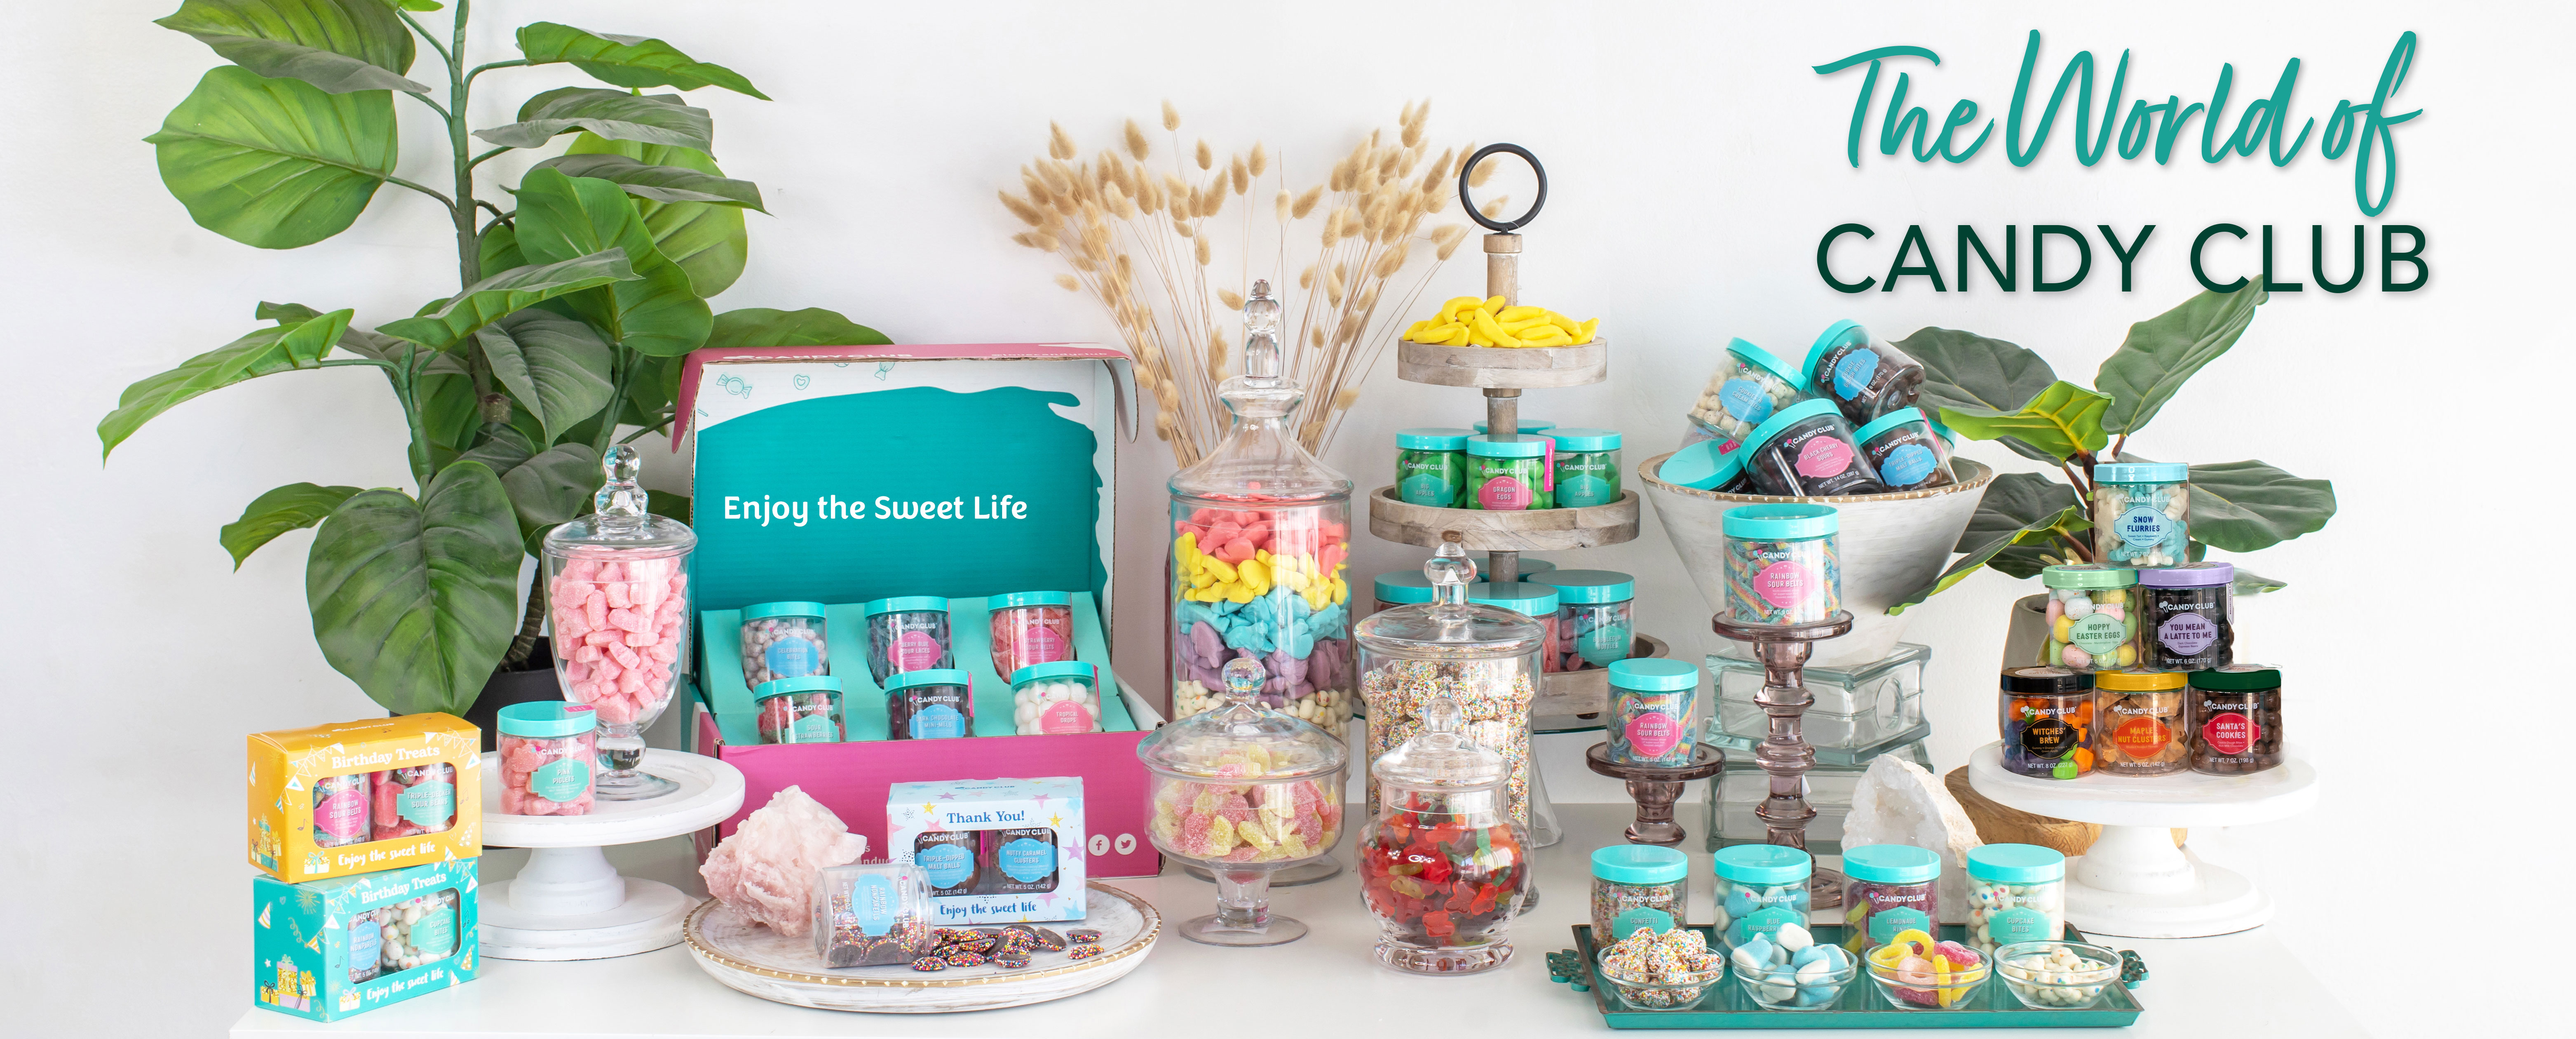 A table display of Candy Club's premium candy, included are the monthly subscription boxes and individual candy cups